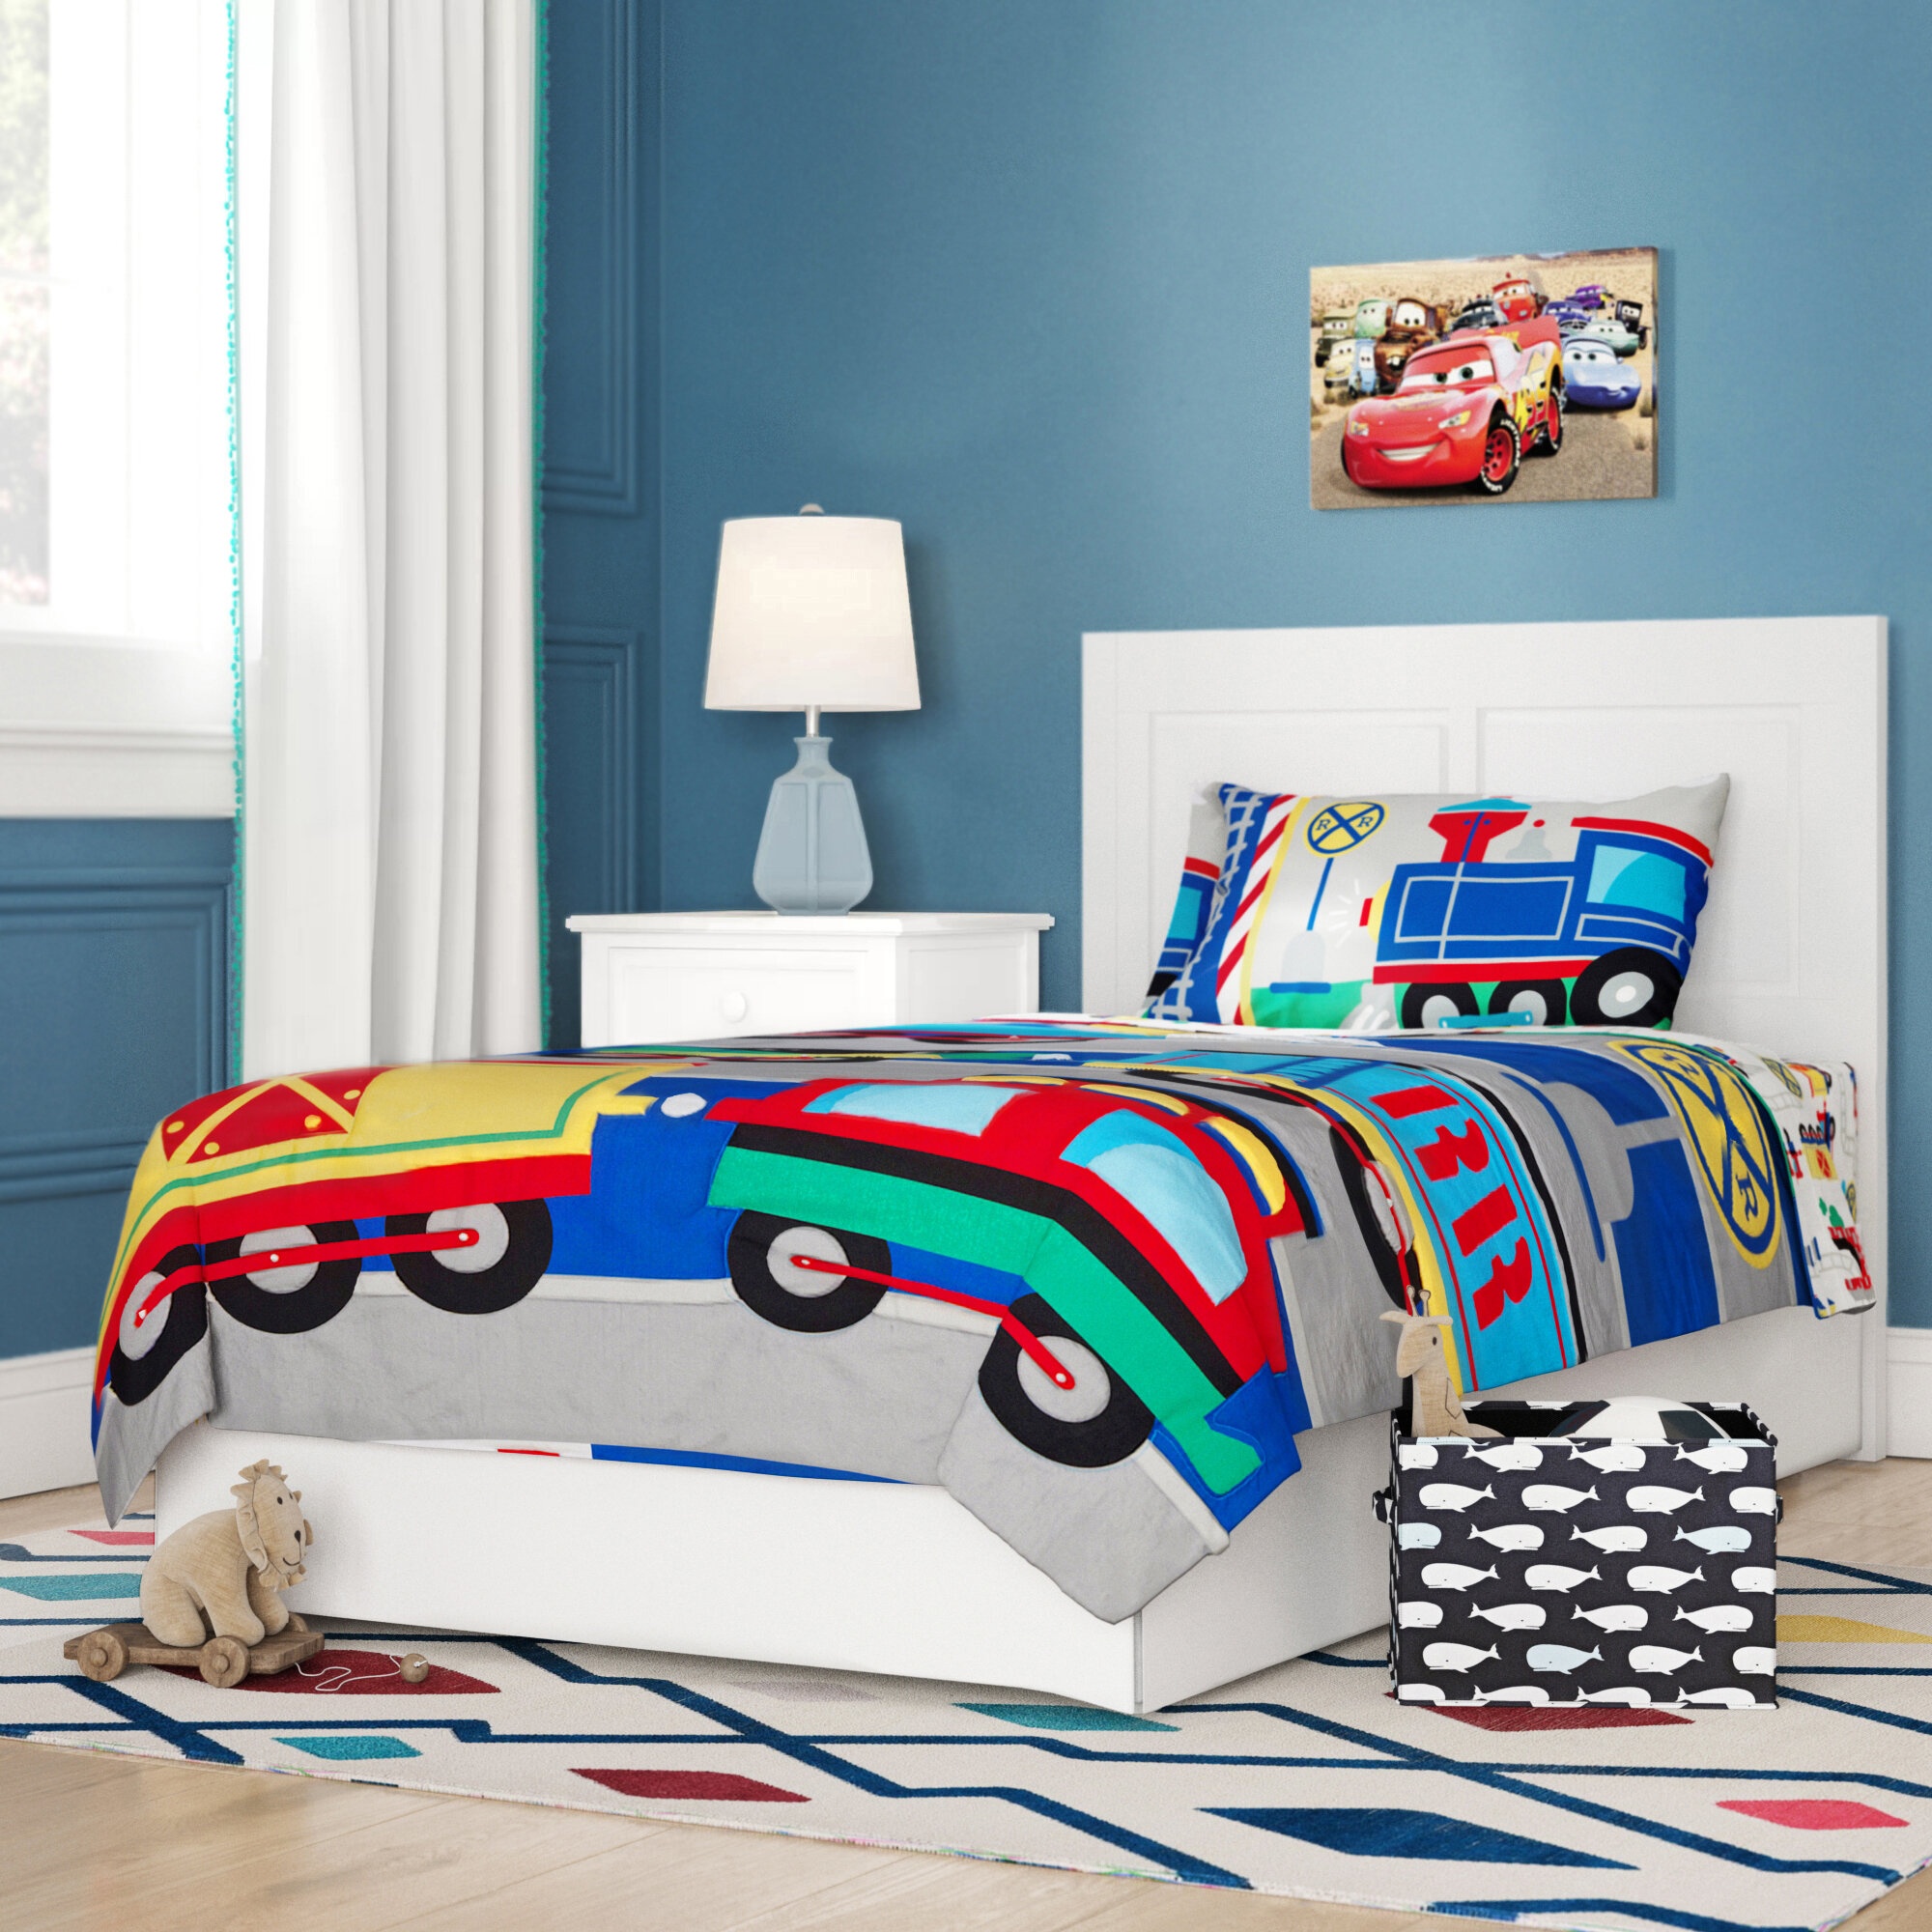  Marvel Spidey & His Amazing Friends Twin Comforter Set - 5  Piece Kids Bedding Includes Comforter, Sheets & Pillow Cover - Super Soft  Superheroes Microfiber Bed Set : Everything Else